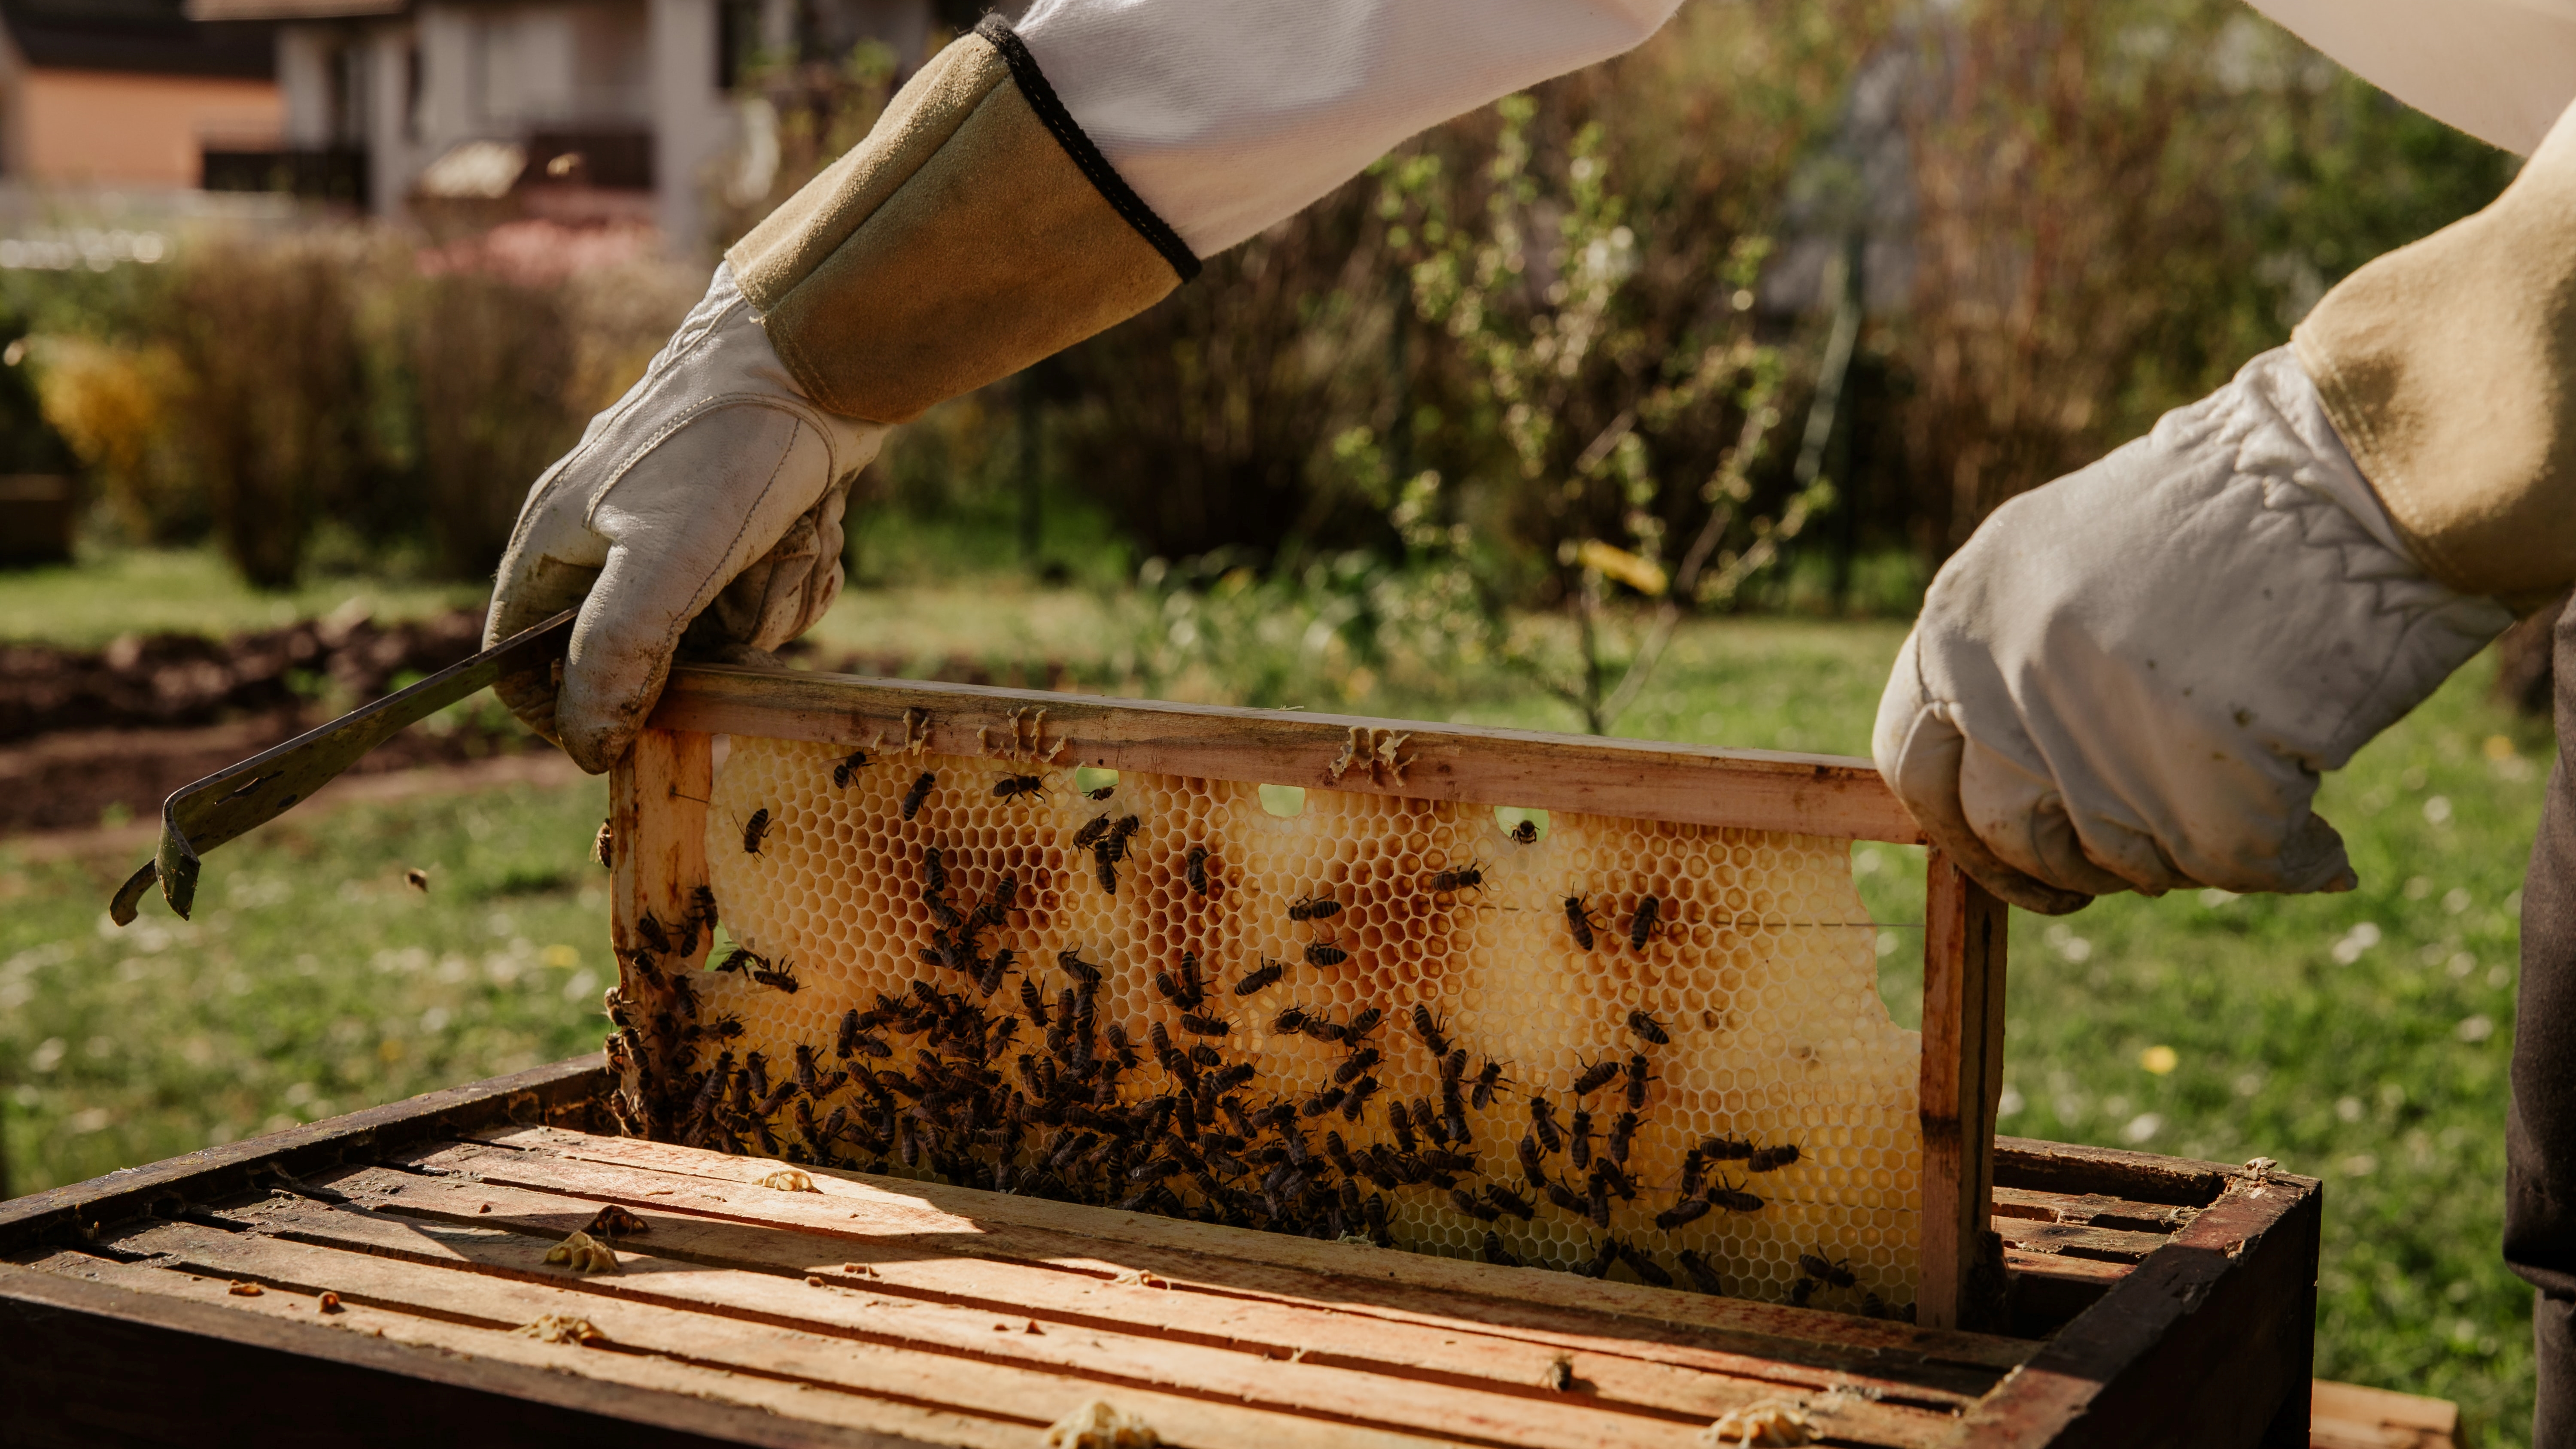 Bee honey could be the unlikely key to unlocking the next era of computing